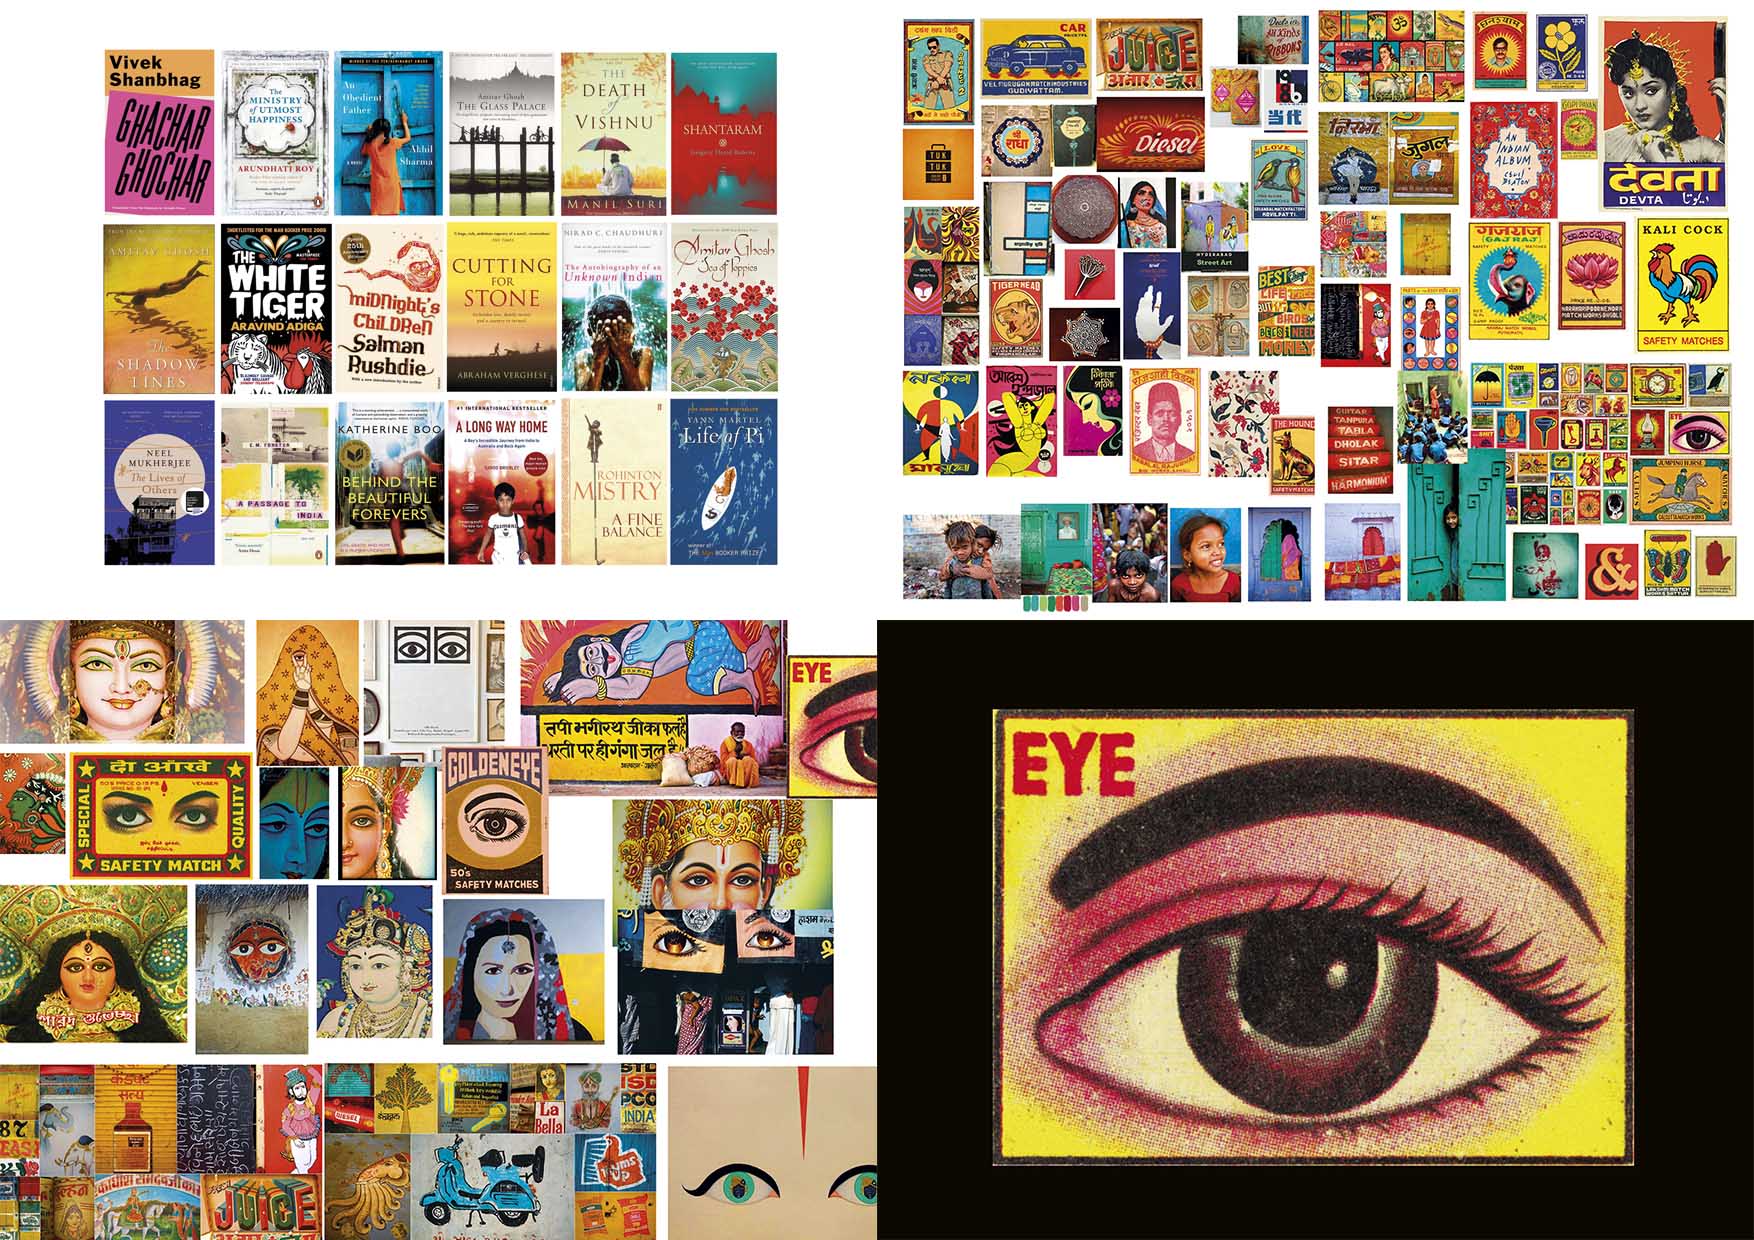 Mood boards of imagery from India, books from India and illustrations of eyes